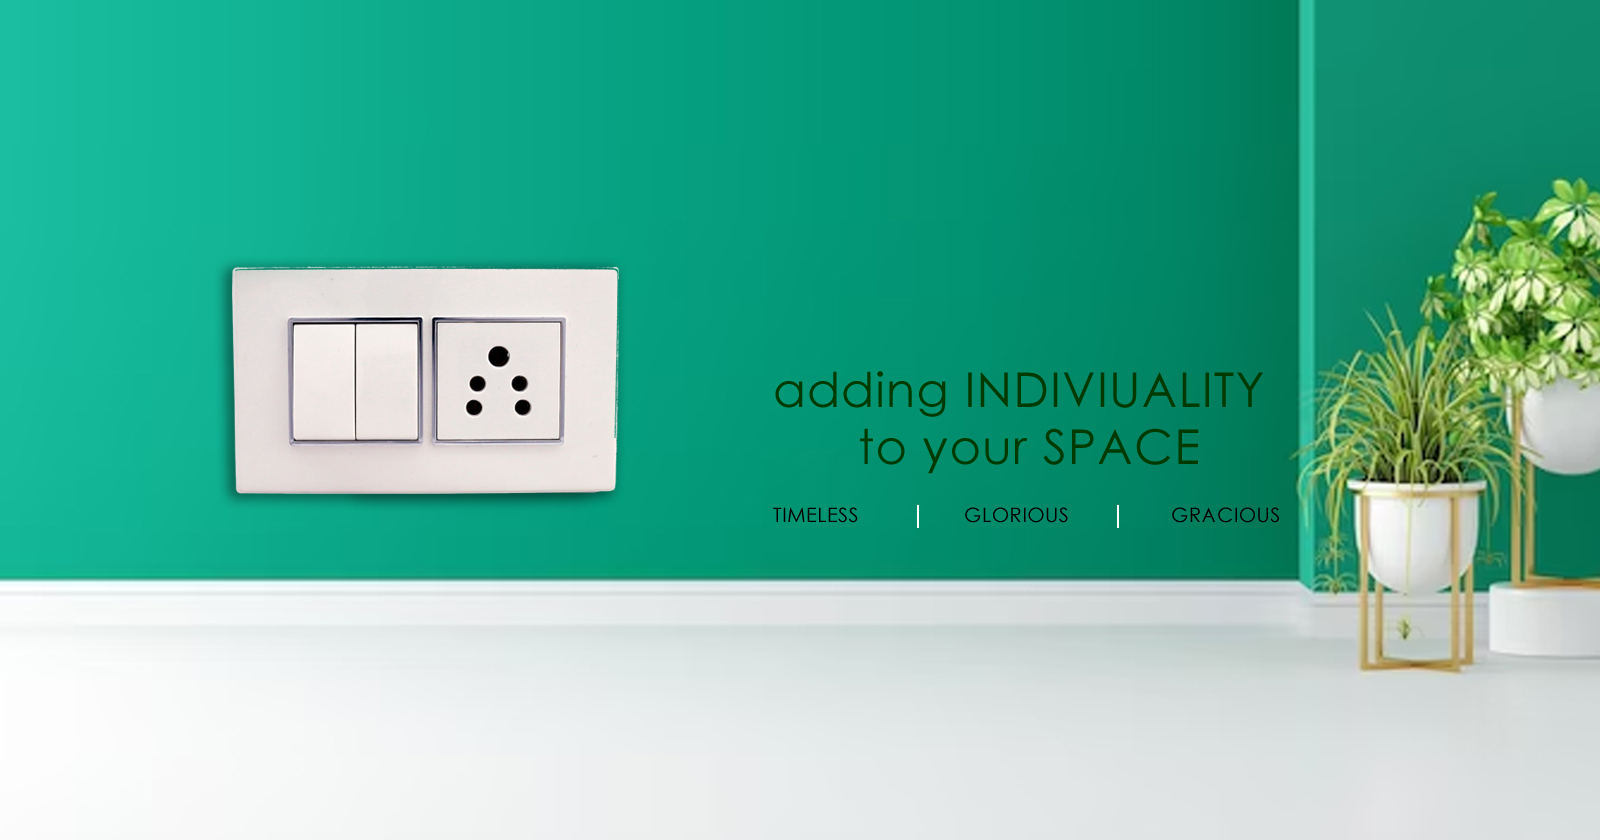 Modular Switch Socket Combination in Indore